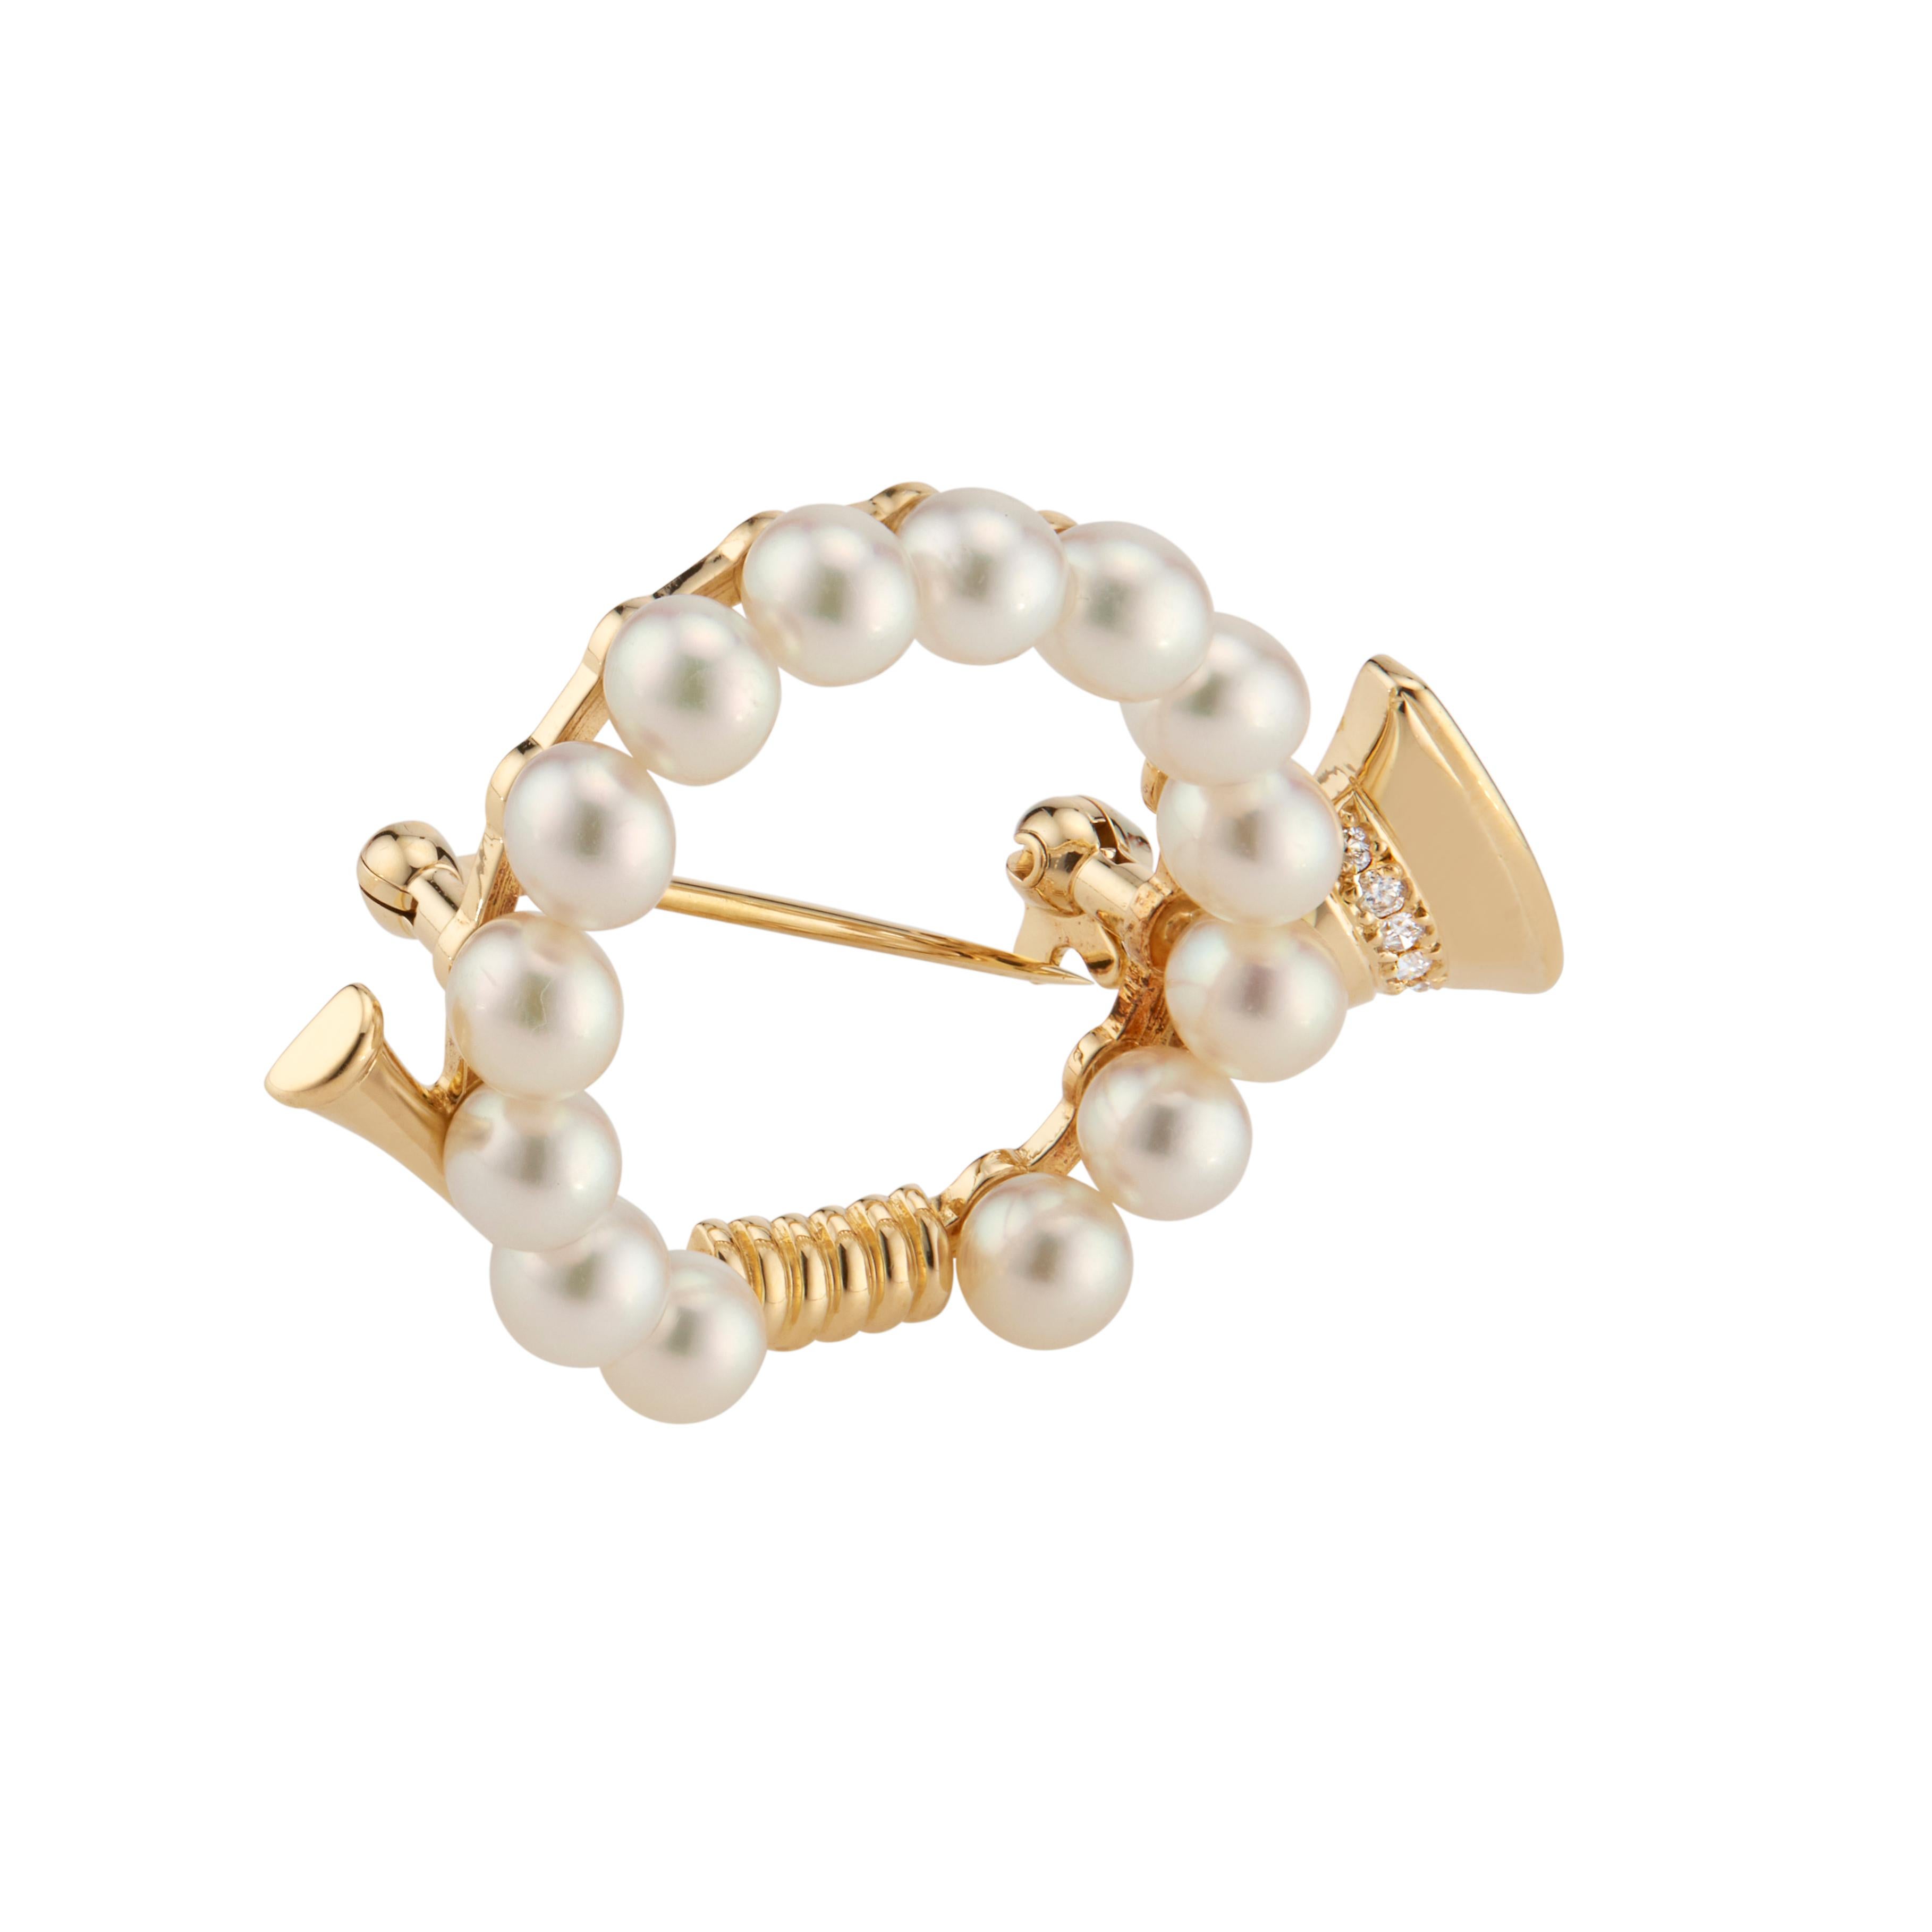 Authentic 18k Mikimoto French Horn Brooch. 14 round Akoya Pearls are Mikimoto’s set in 18k yellow gold with 5 round accent diamonds. 

 5 round diamonds approx. total weight .05cts, F, VS. 
14 round cultured Akoya pearls 4.5mm. 
18k yellow gold